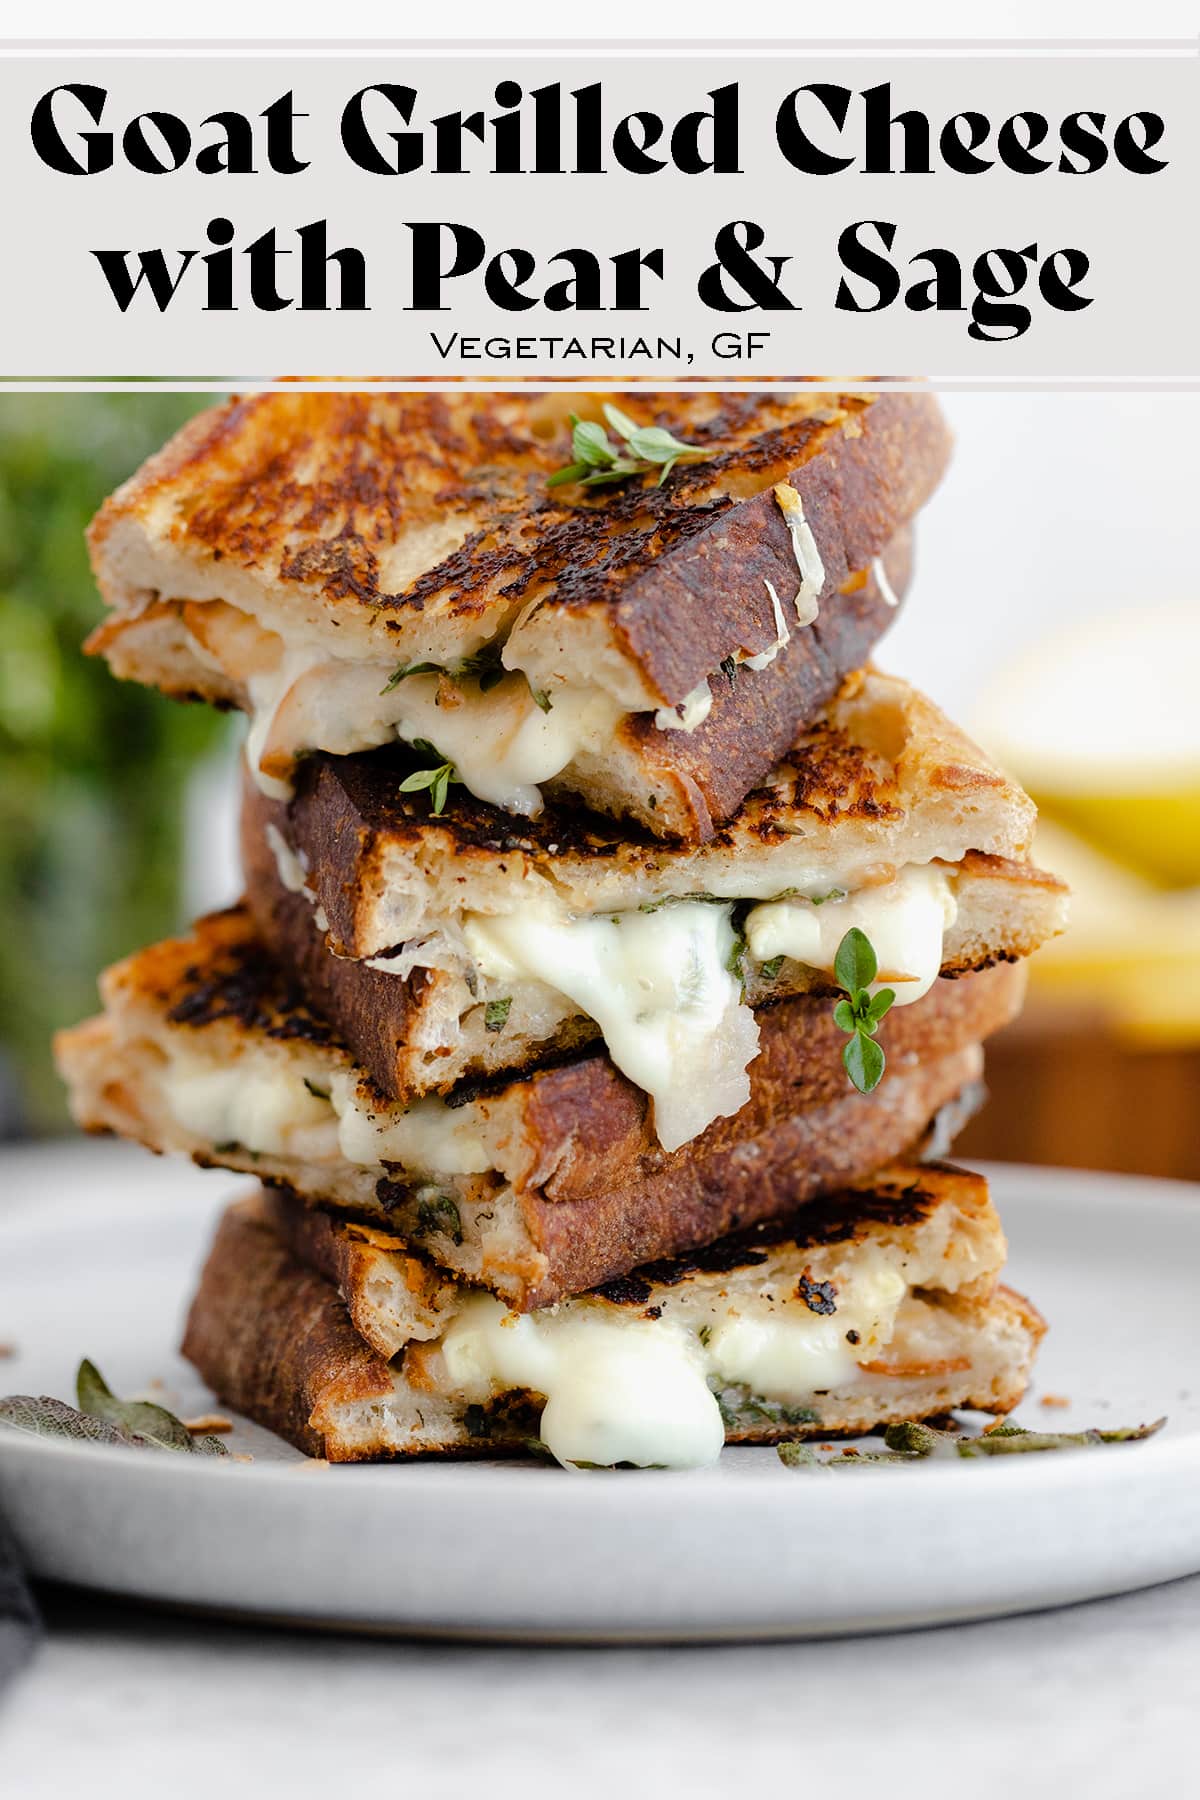 Goat Grilled Cheese with Pear and Sage